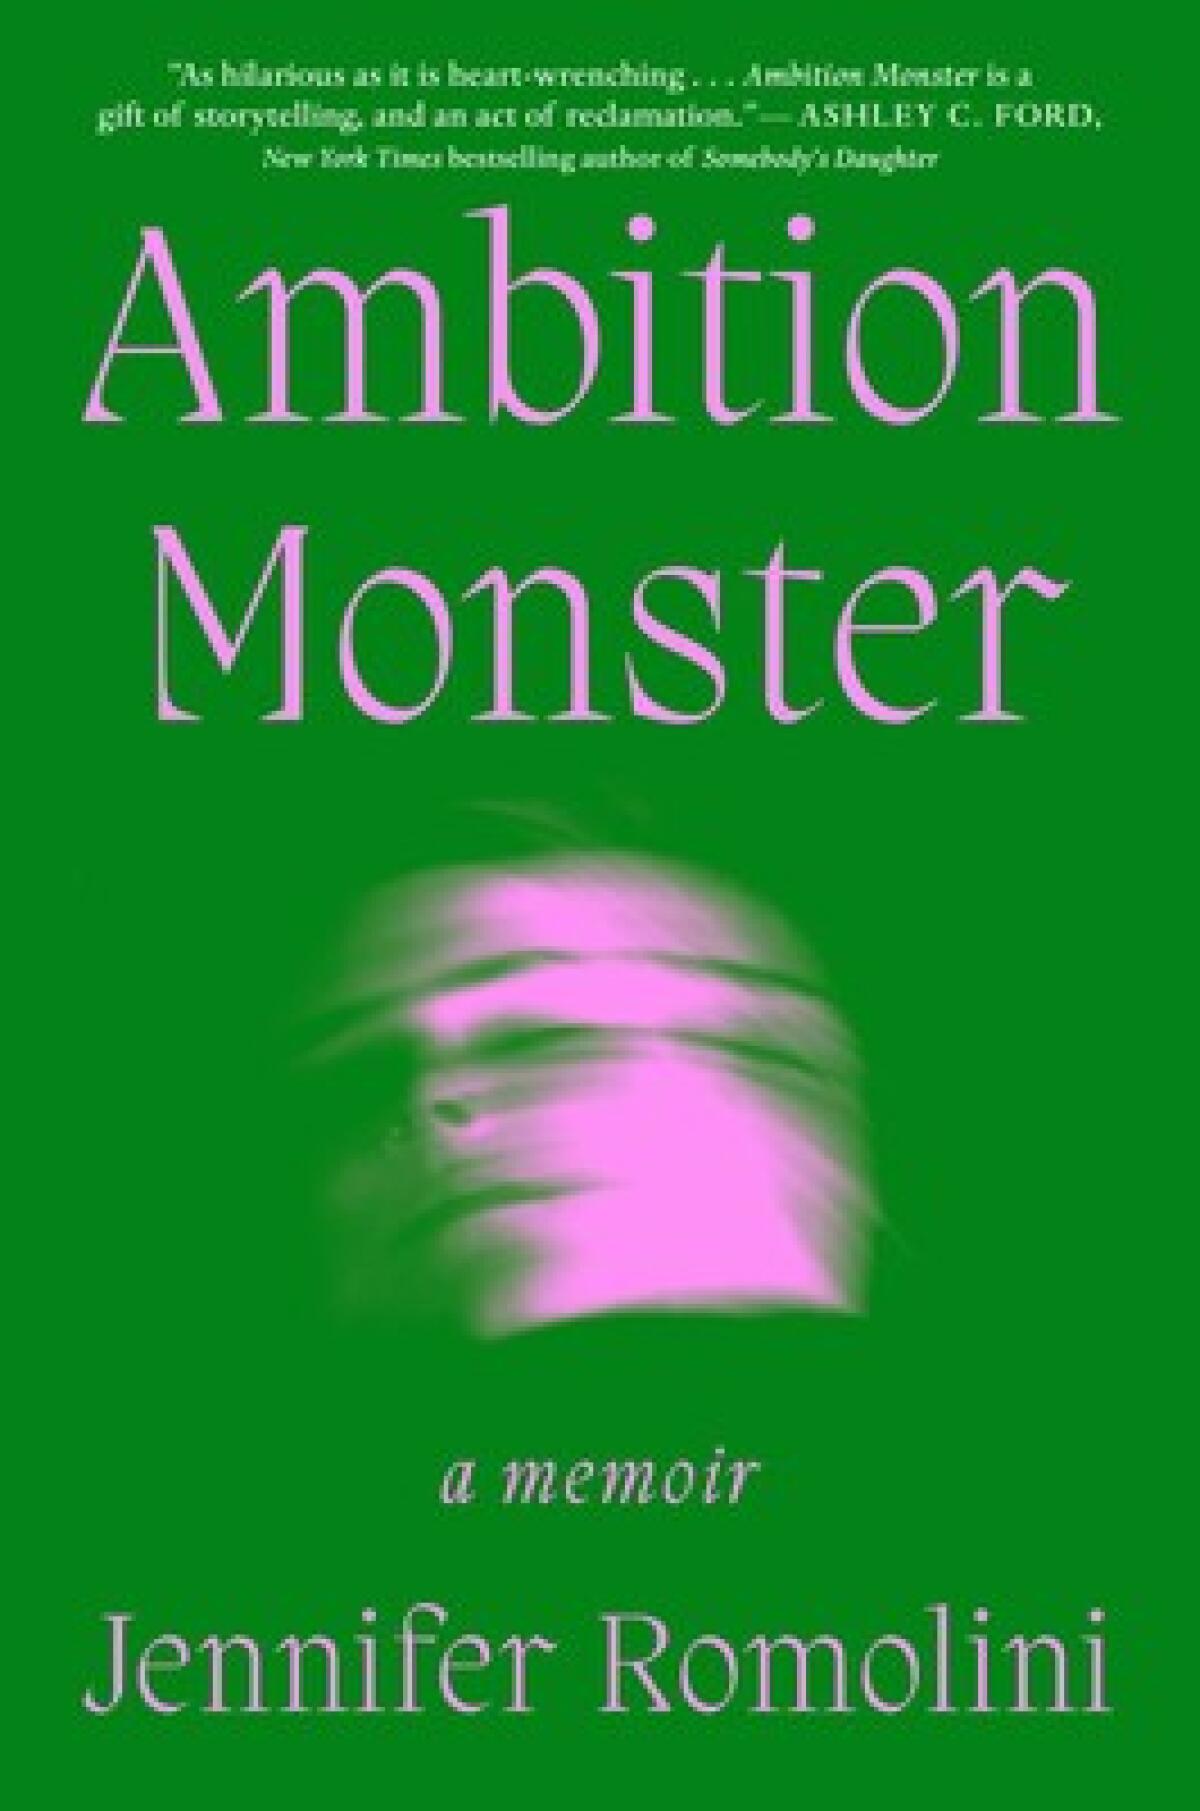 the cover of "Monster of ambition"